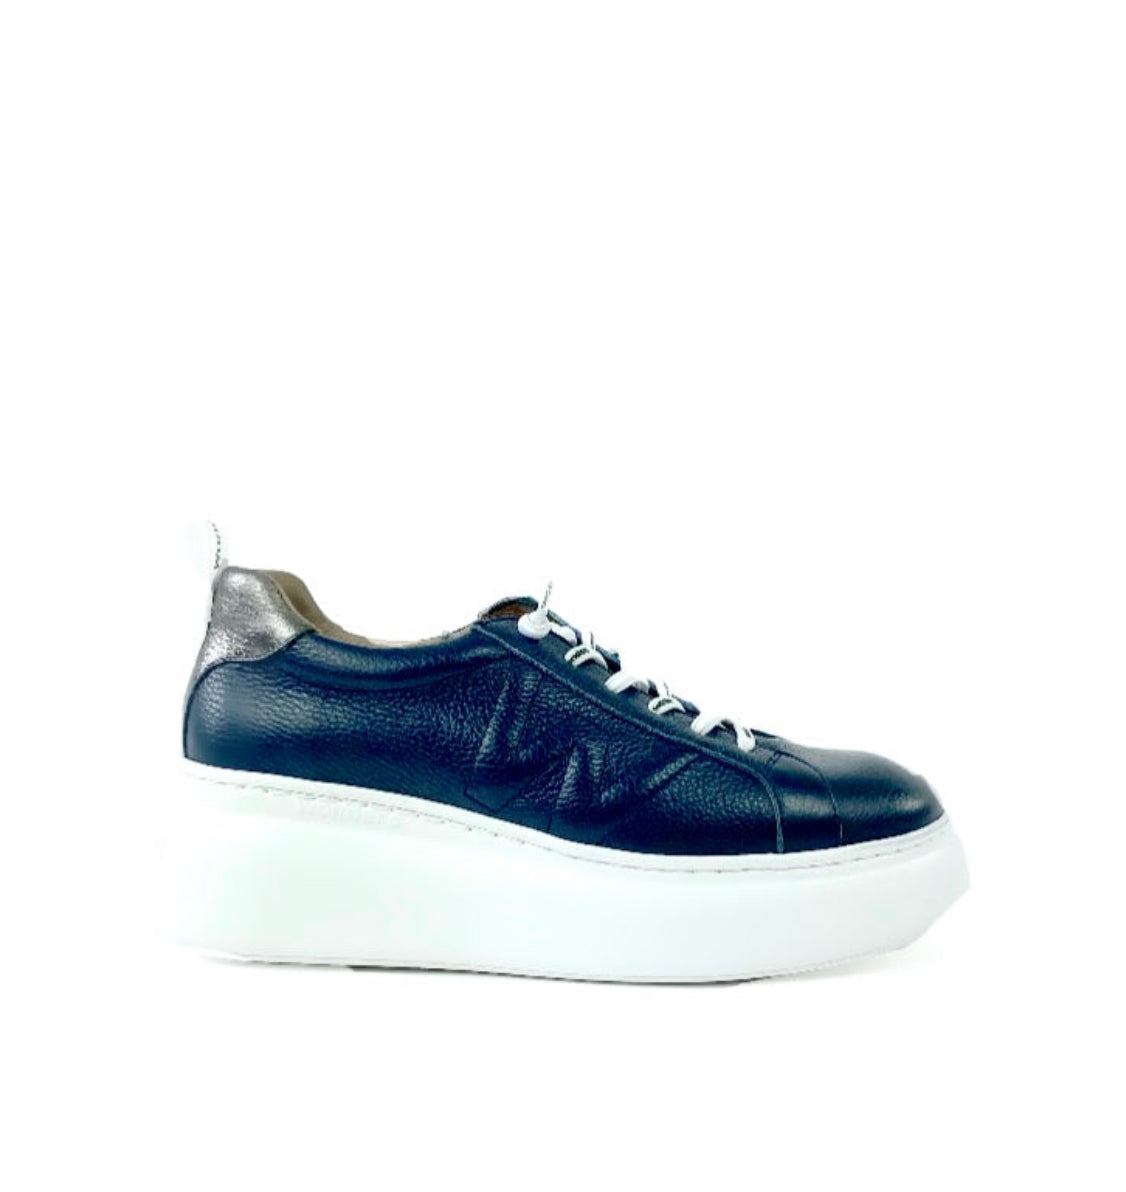 Wonders- A-2632 Navy and White Trainer